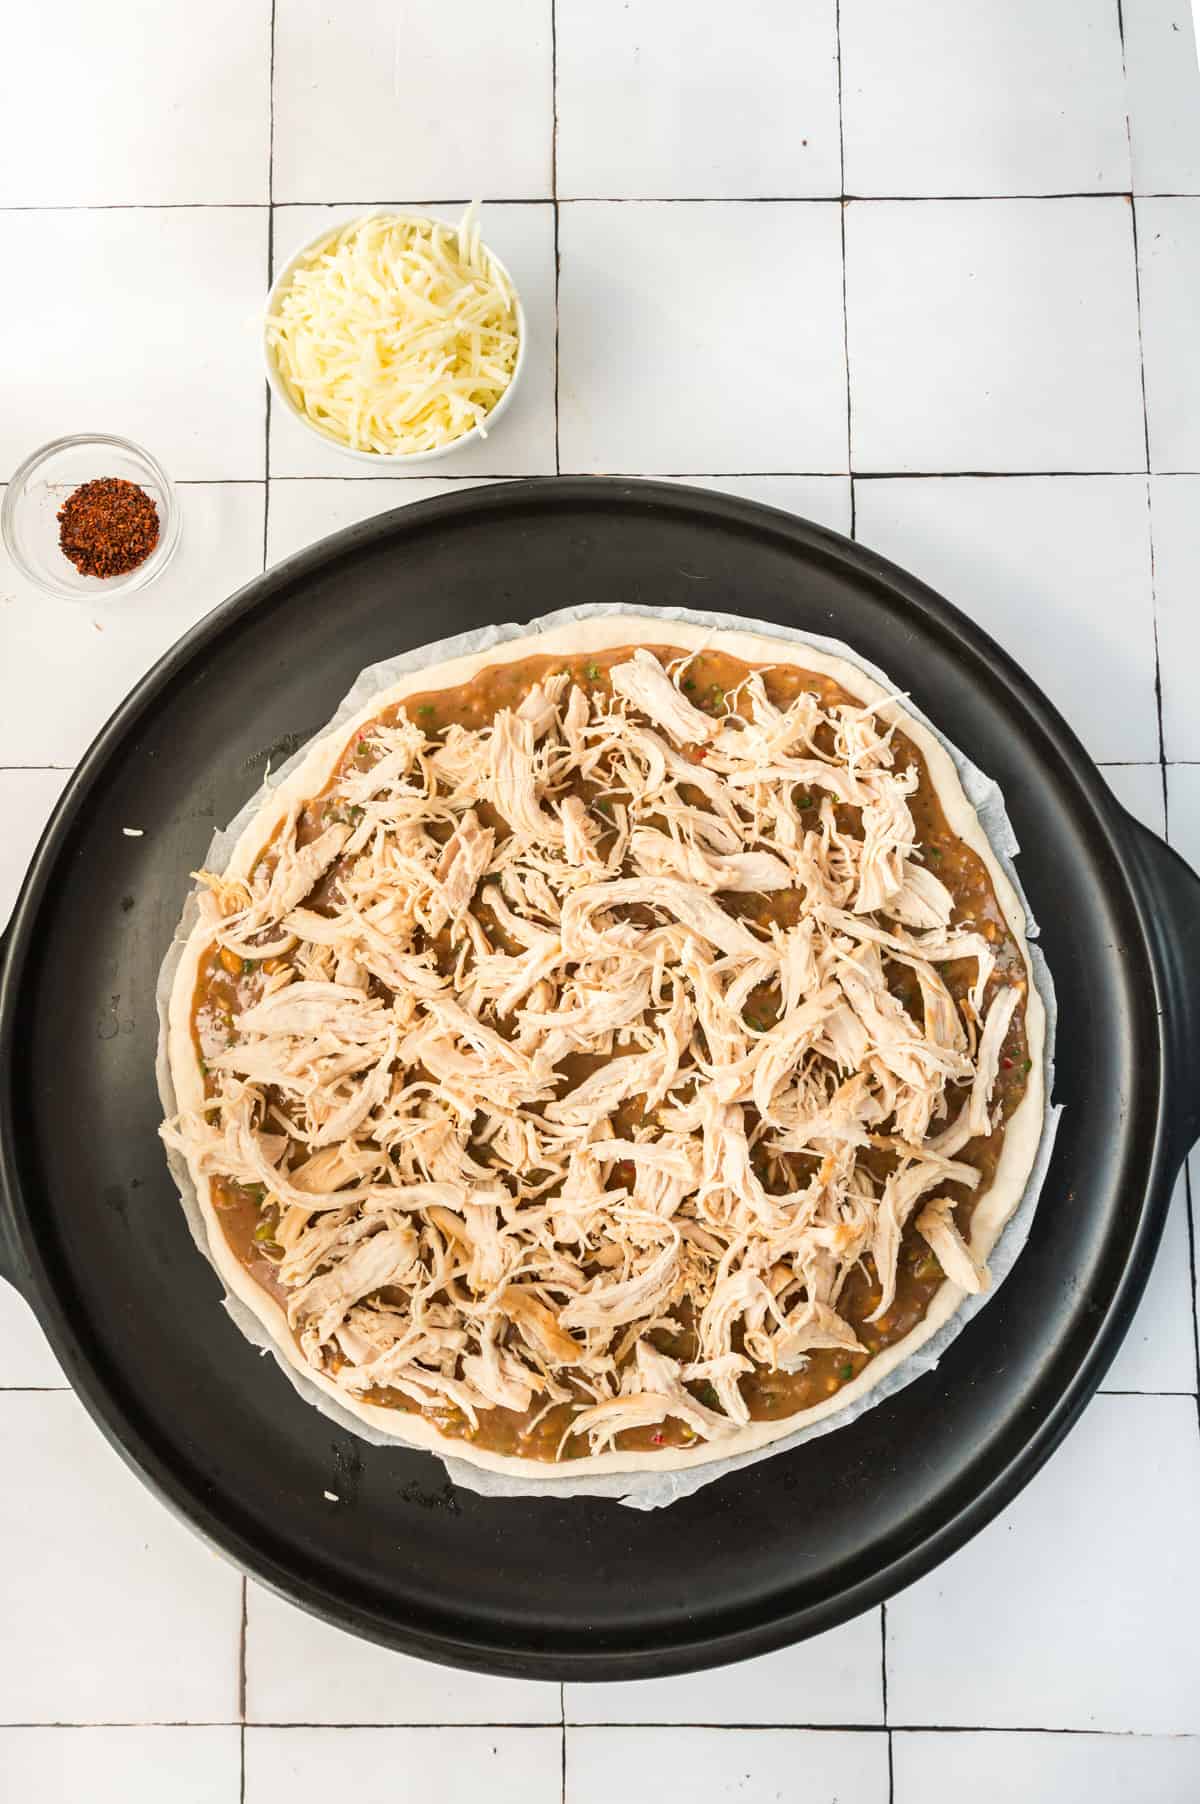 An unbaked pizza topped with shredded chicken.